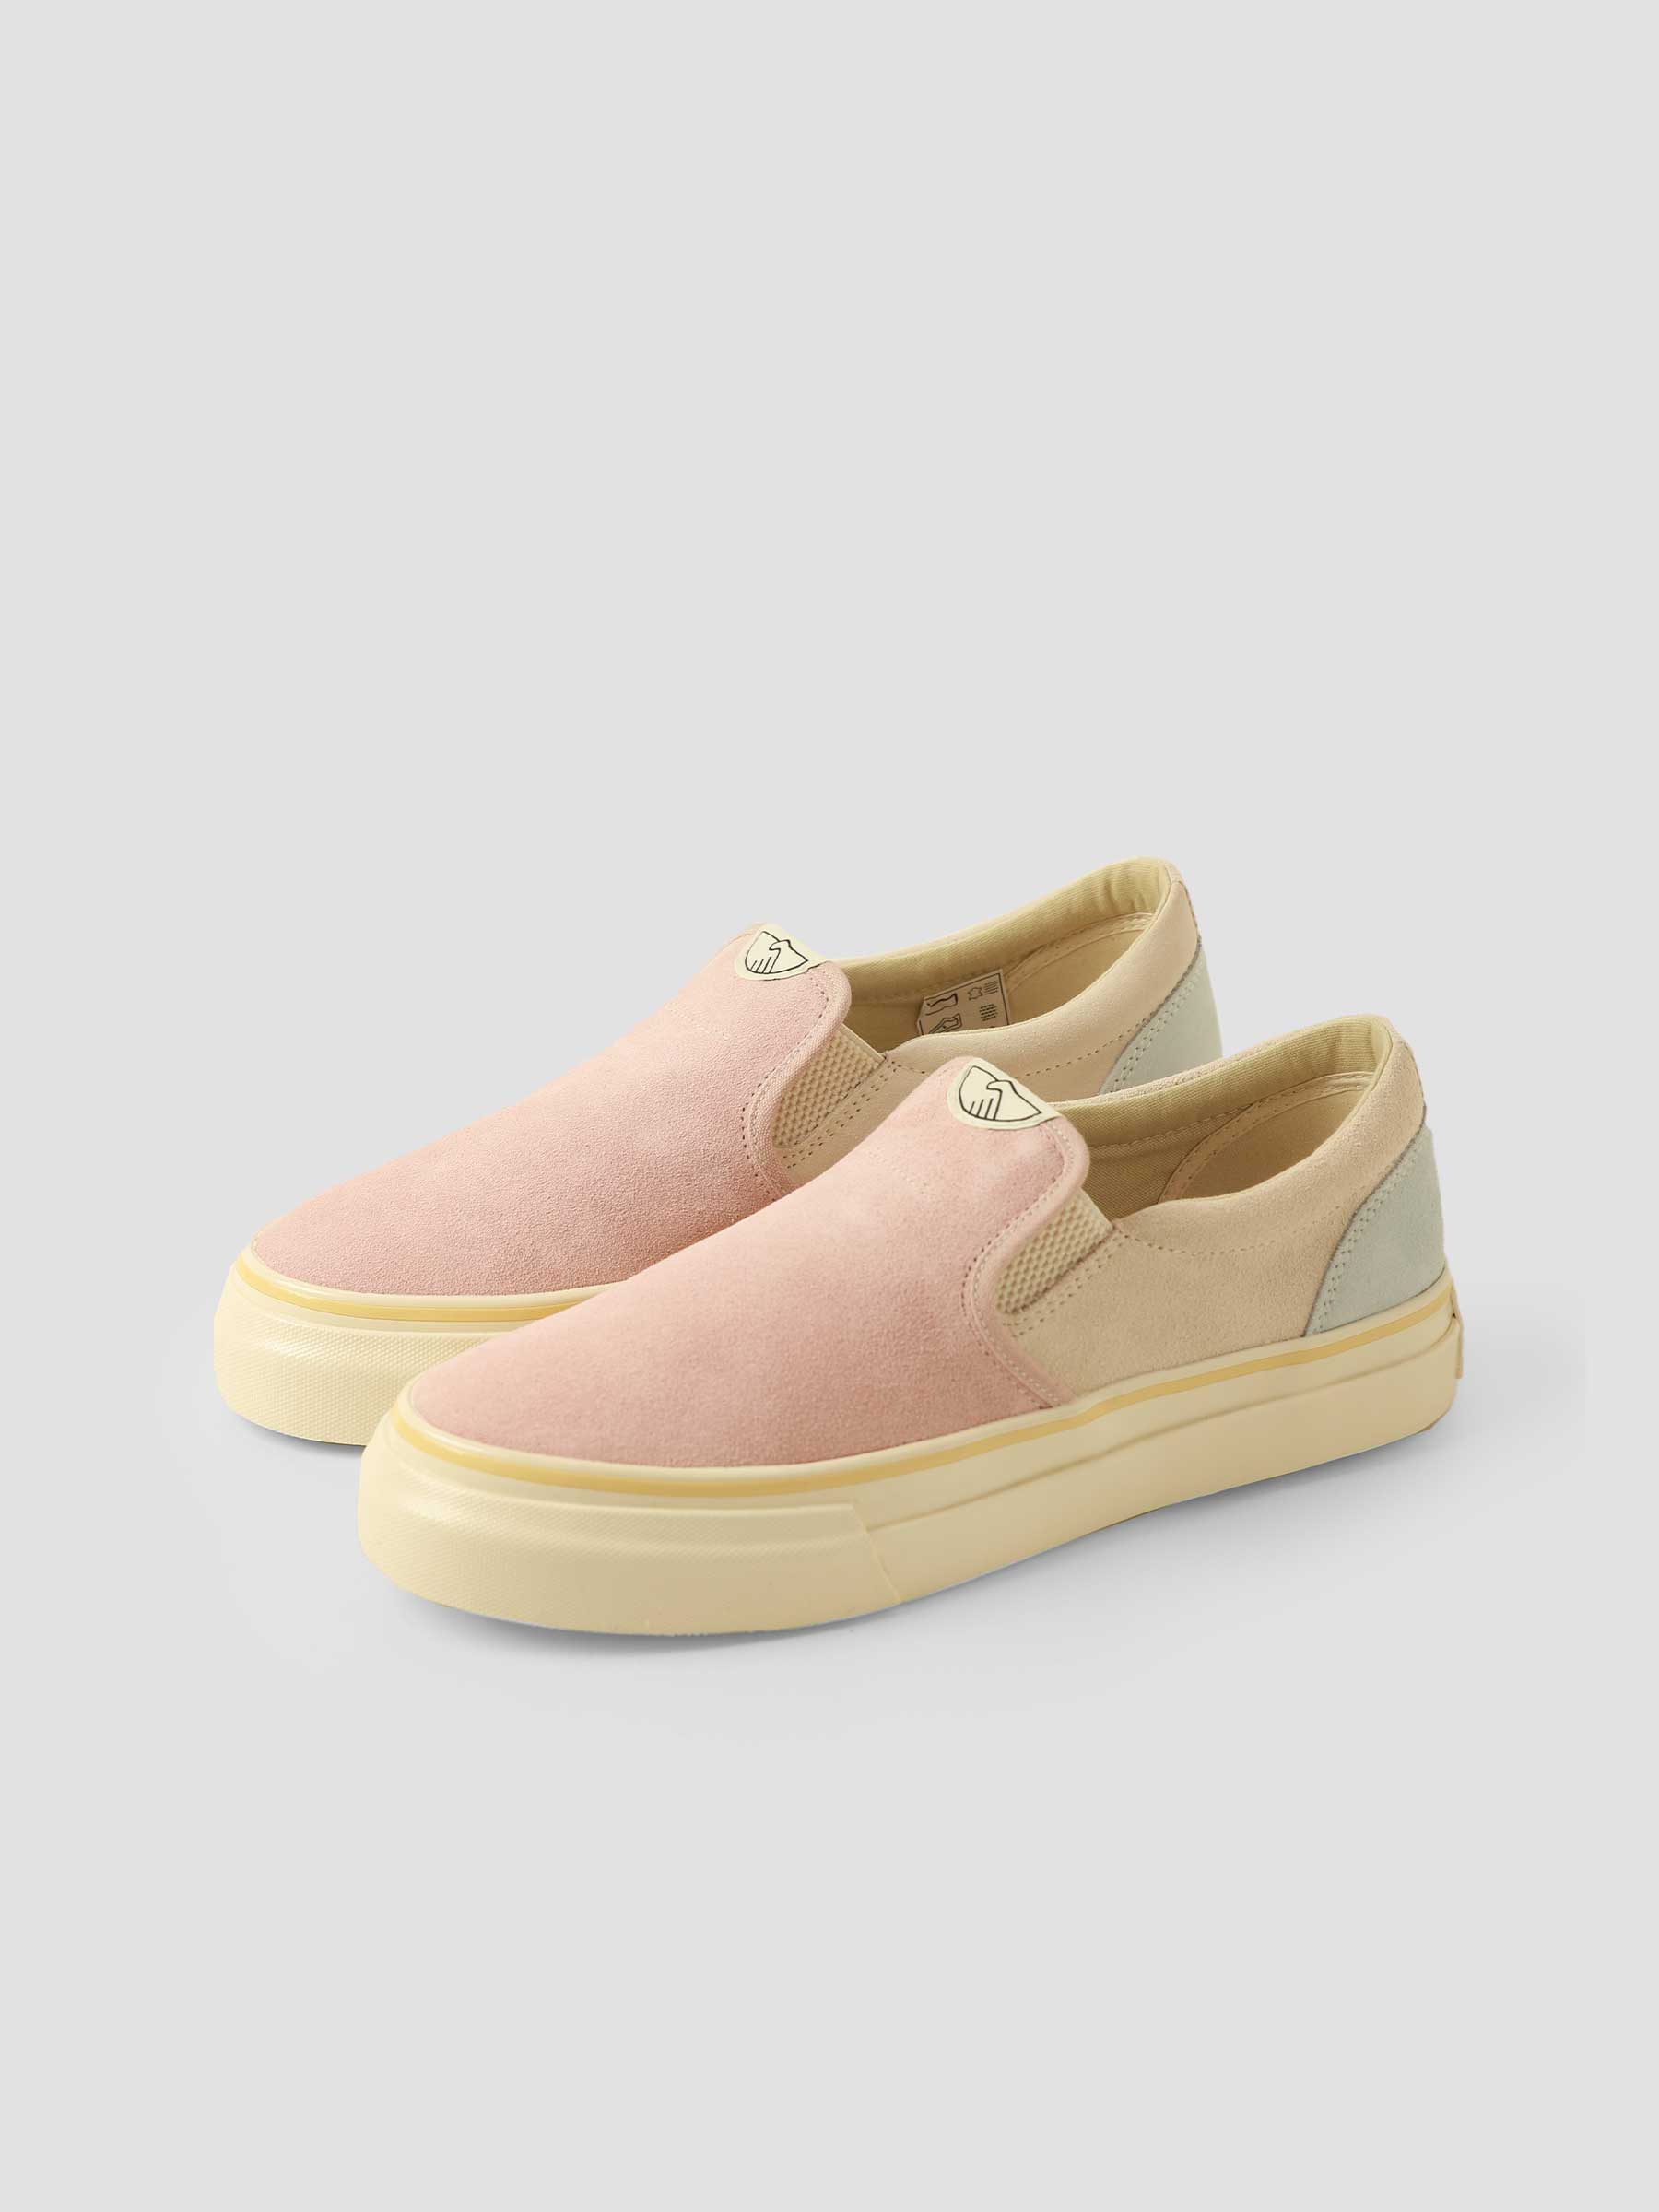 Lister Suede Pastel Mix YA03355